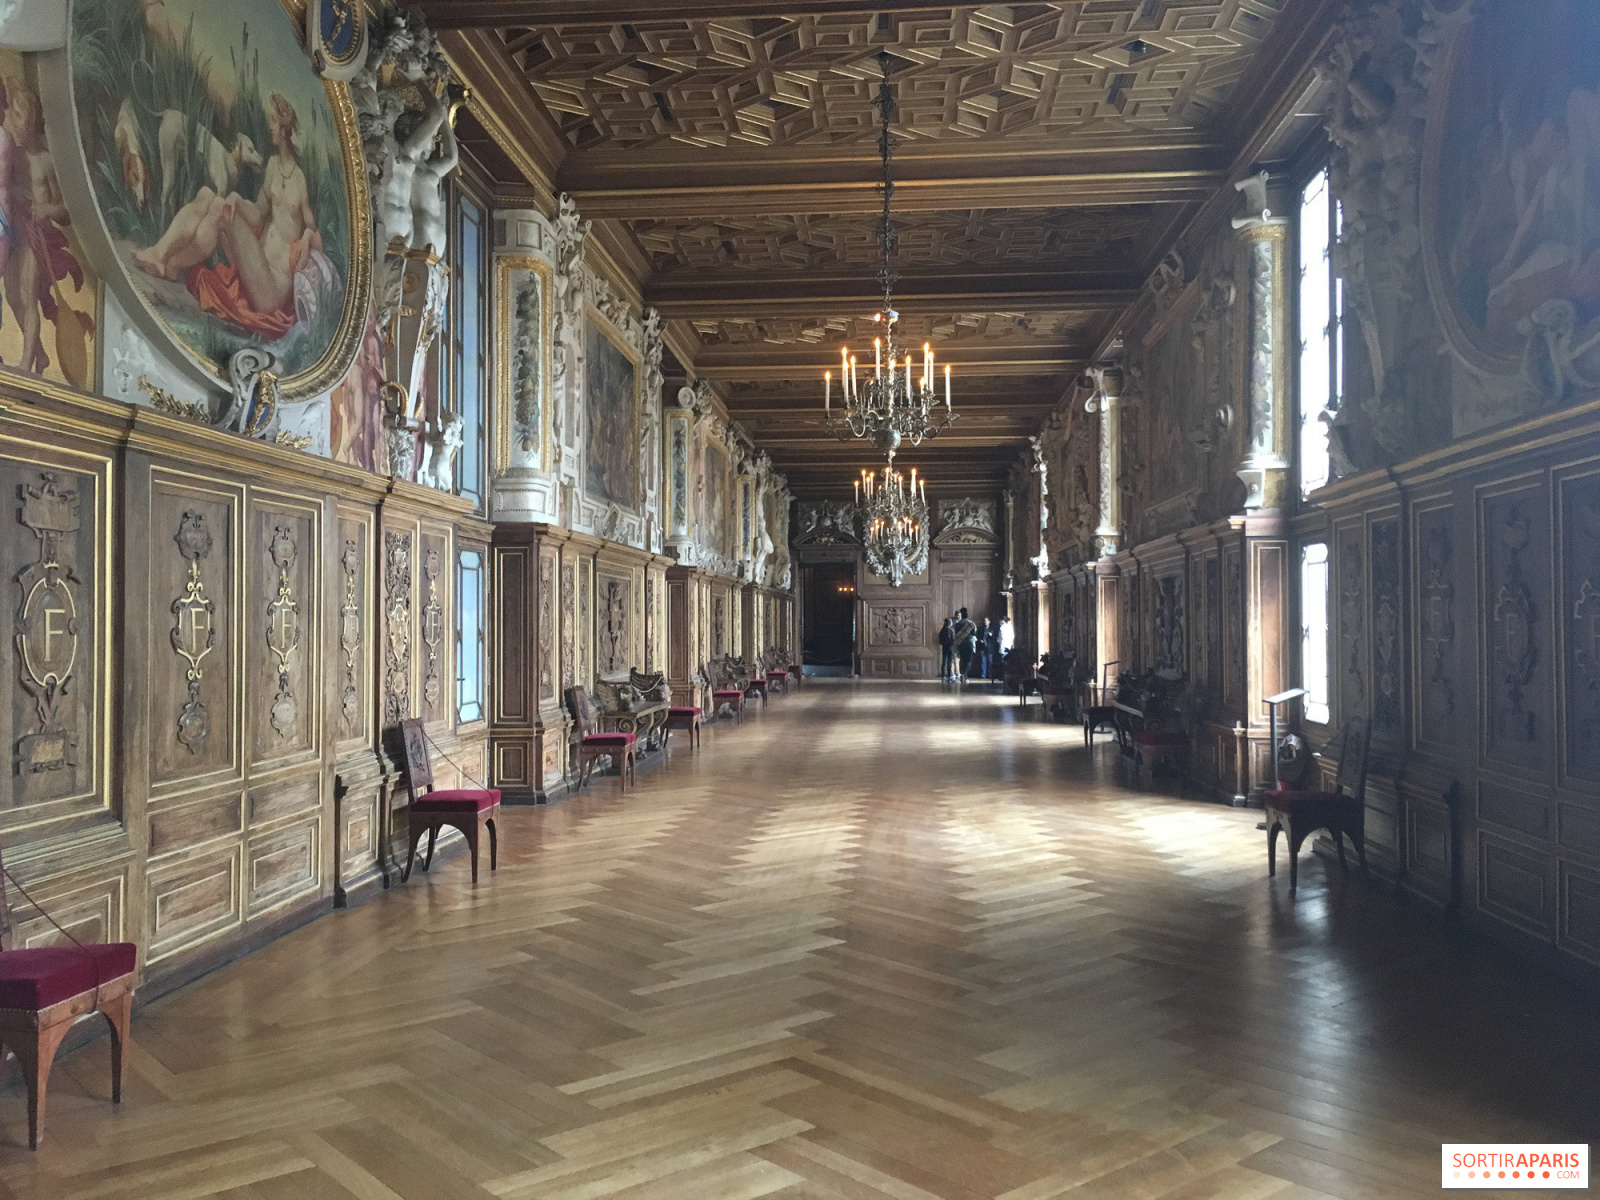 Fontainebleau, France, March 30, 2017: Room Interior in Palace